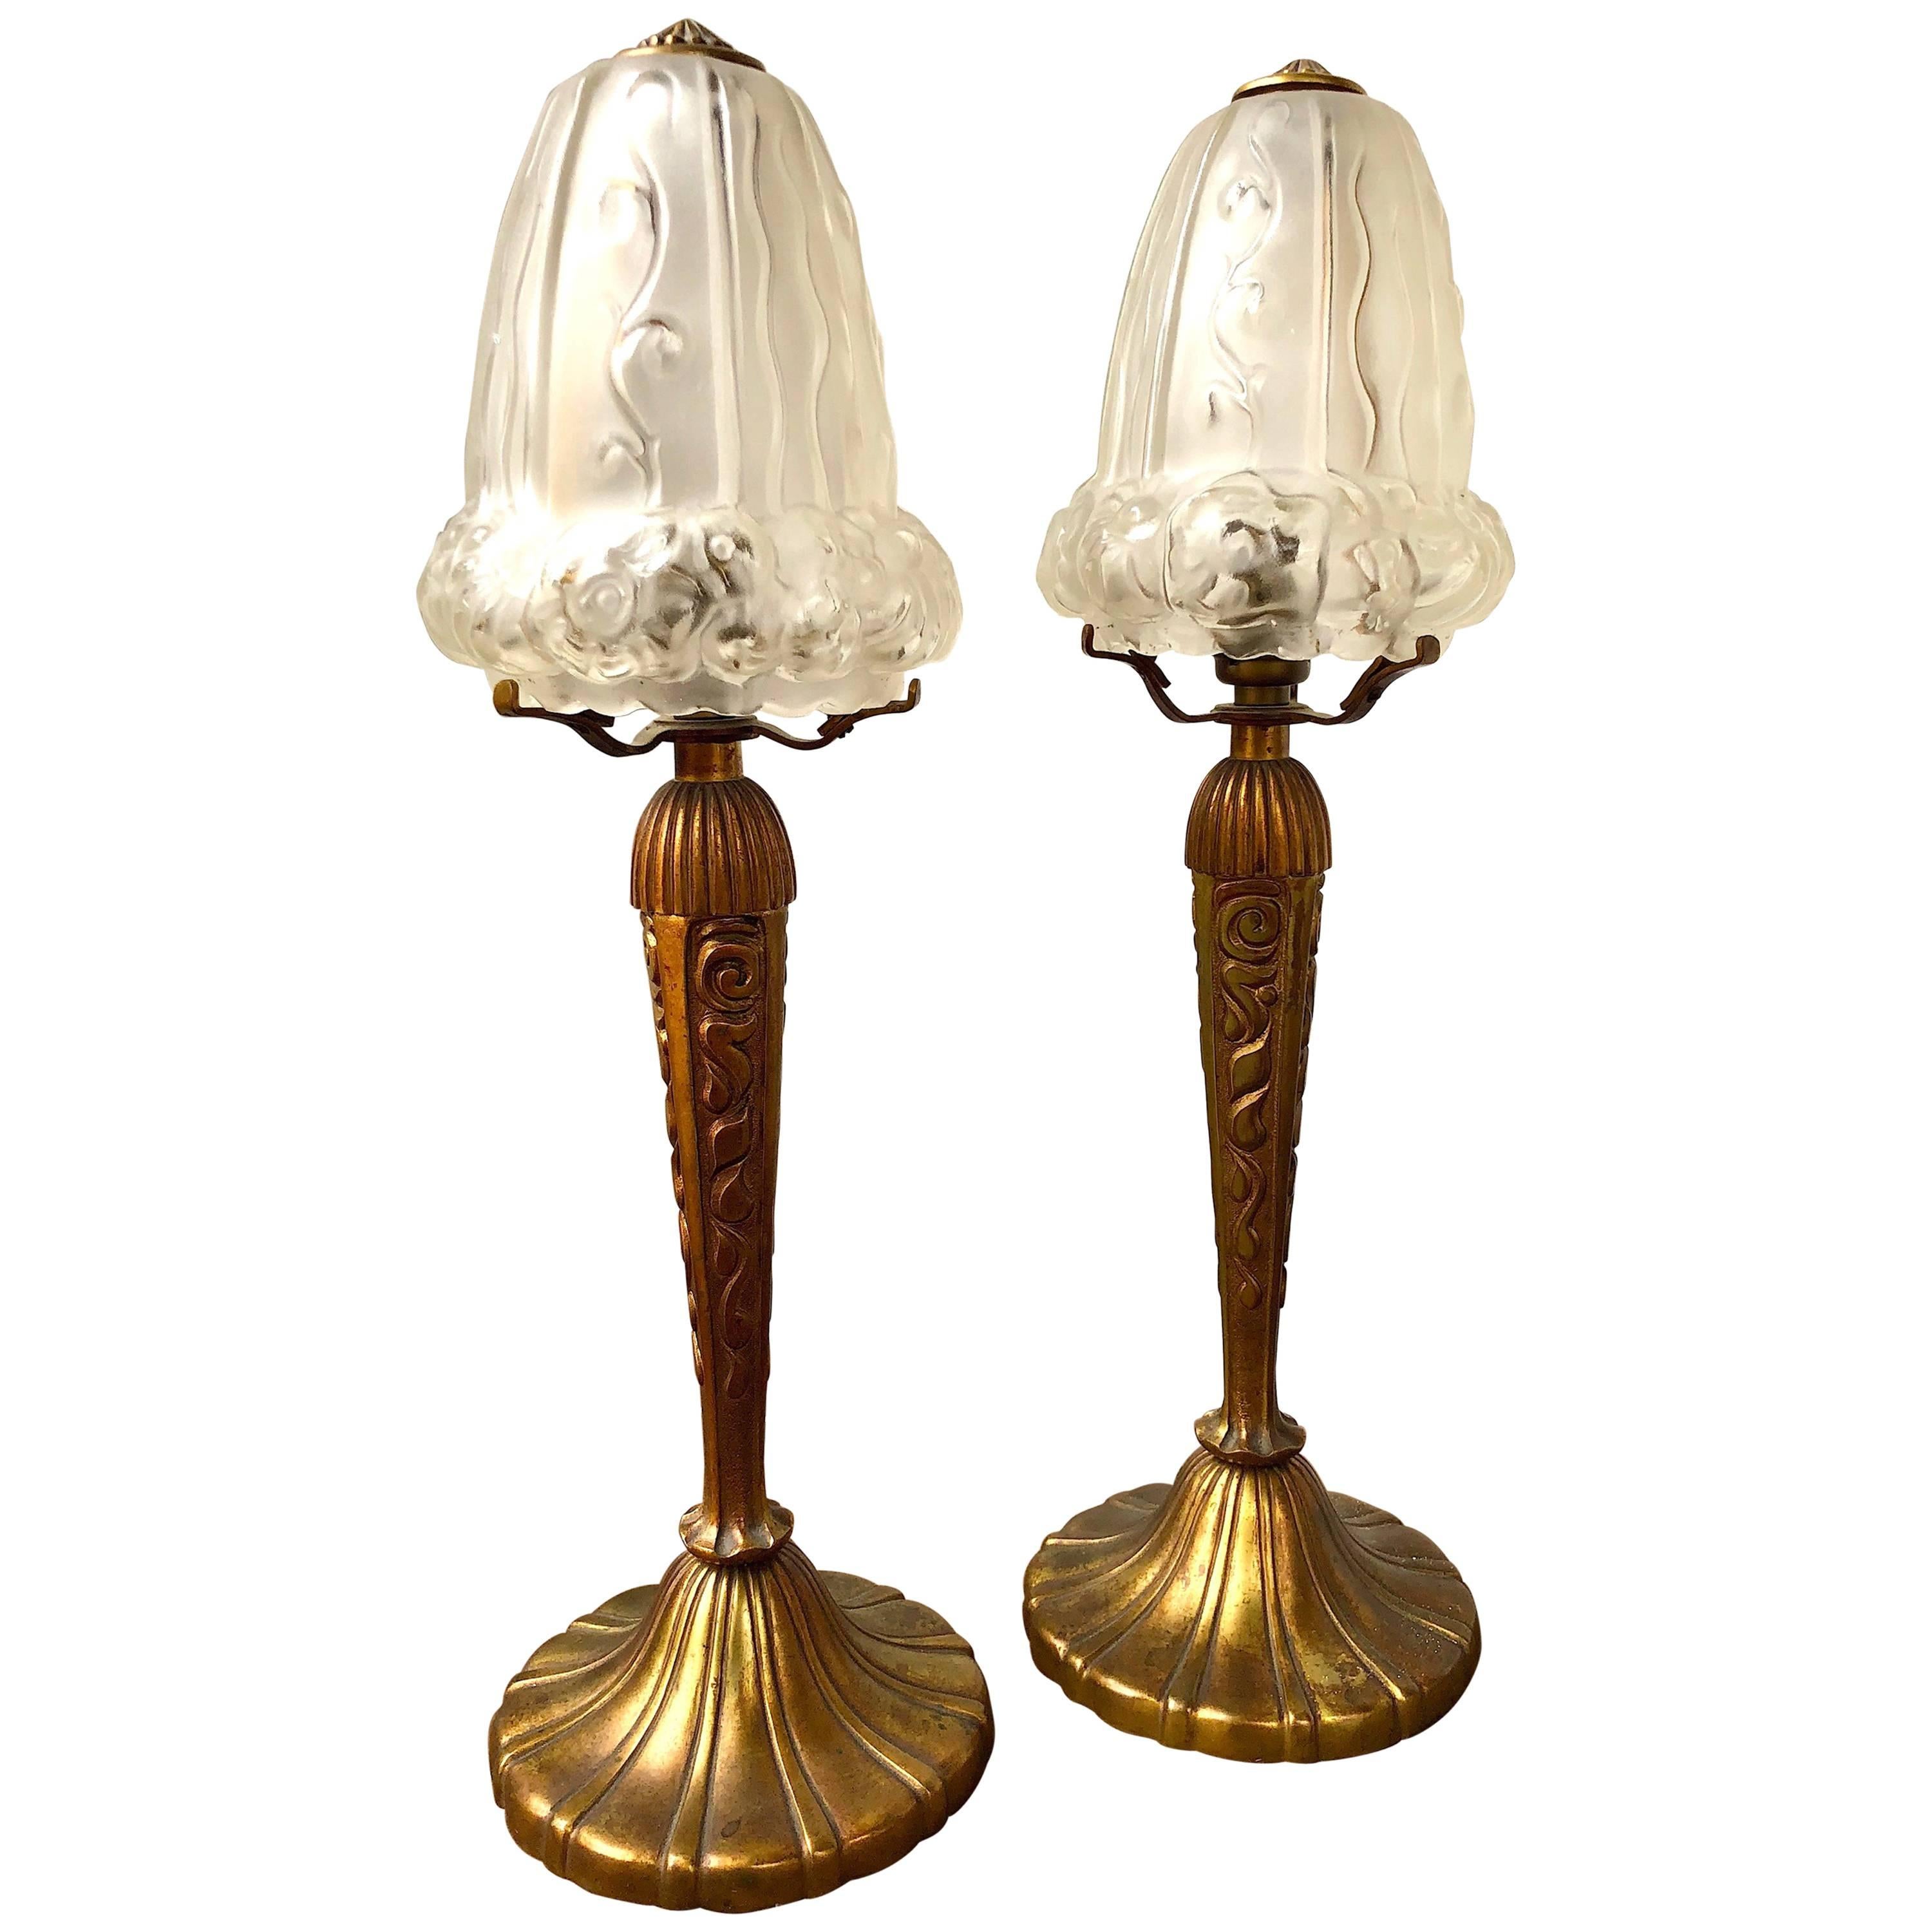 Pair of Art Nouveau Bronze Table Lamps with Glass Shades